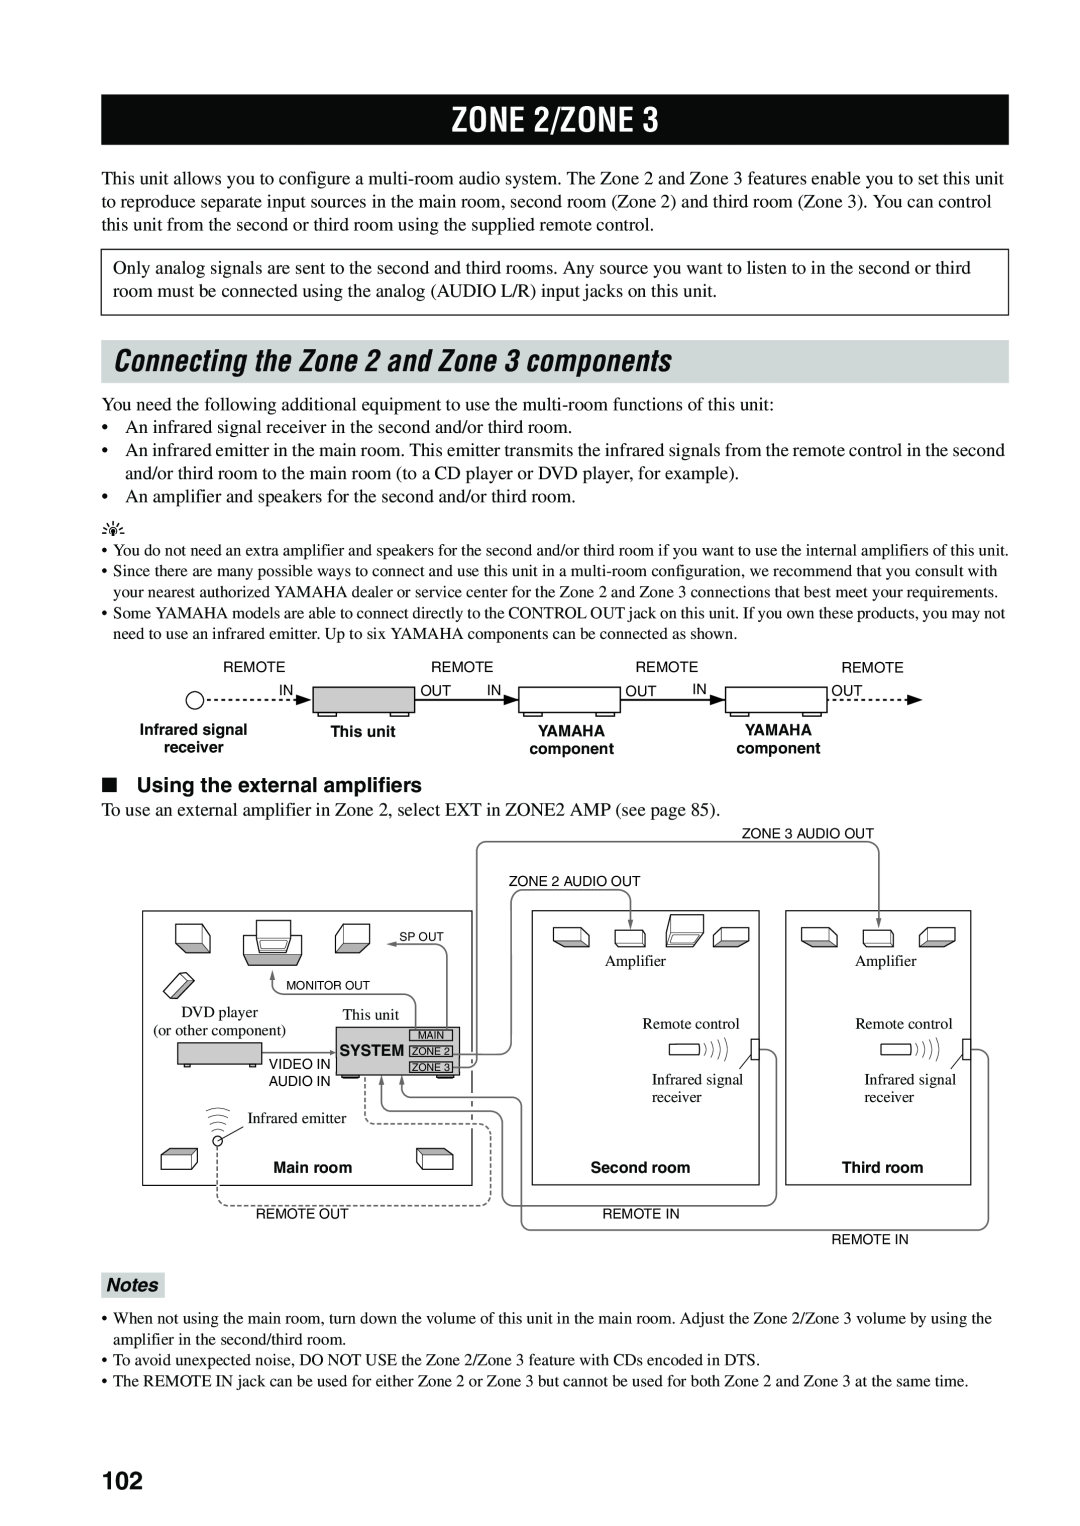 Yamaha HTR-5990 owner manual ZONE 2/ZONE, Connecting the Zone 2 and Zone 3 components, Using the external amplifiers, Notes 